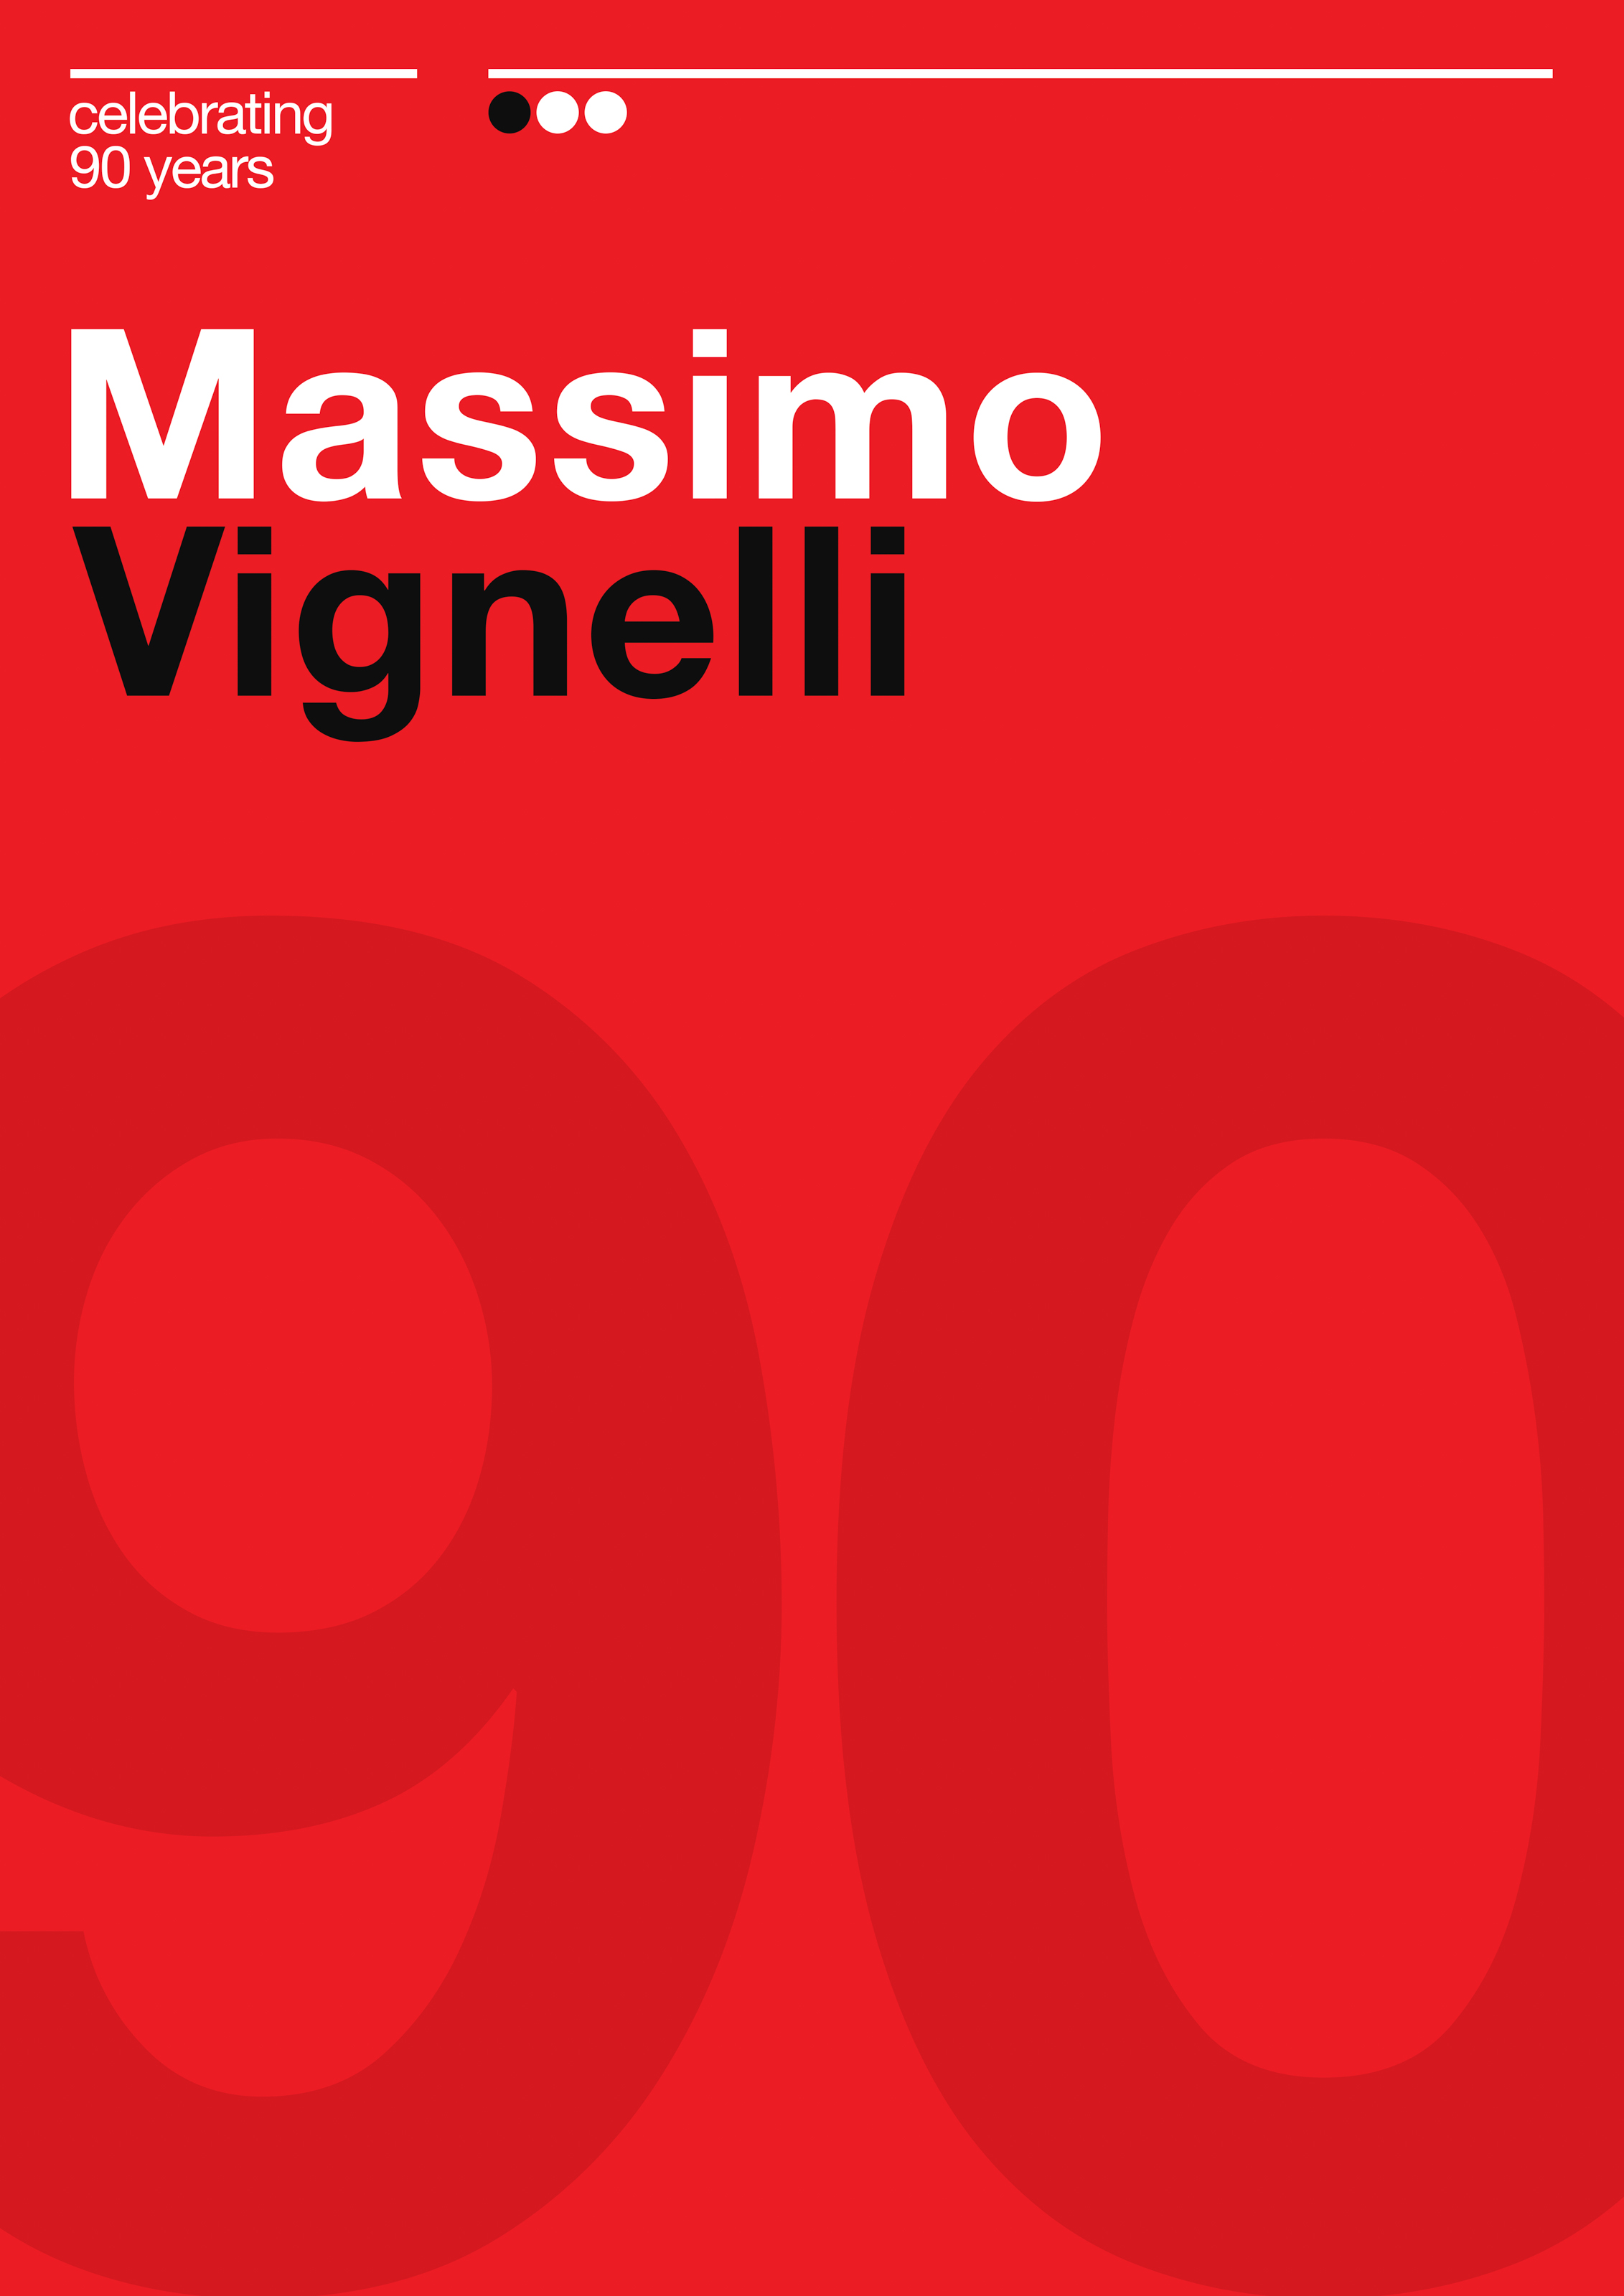 A red poster designed by Eric Castaneda inspired by Massimo Vignelli.